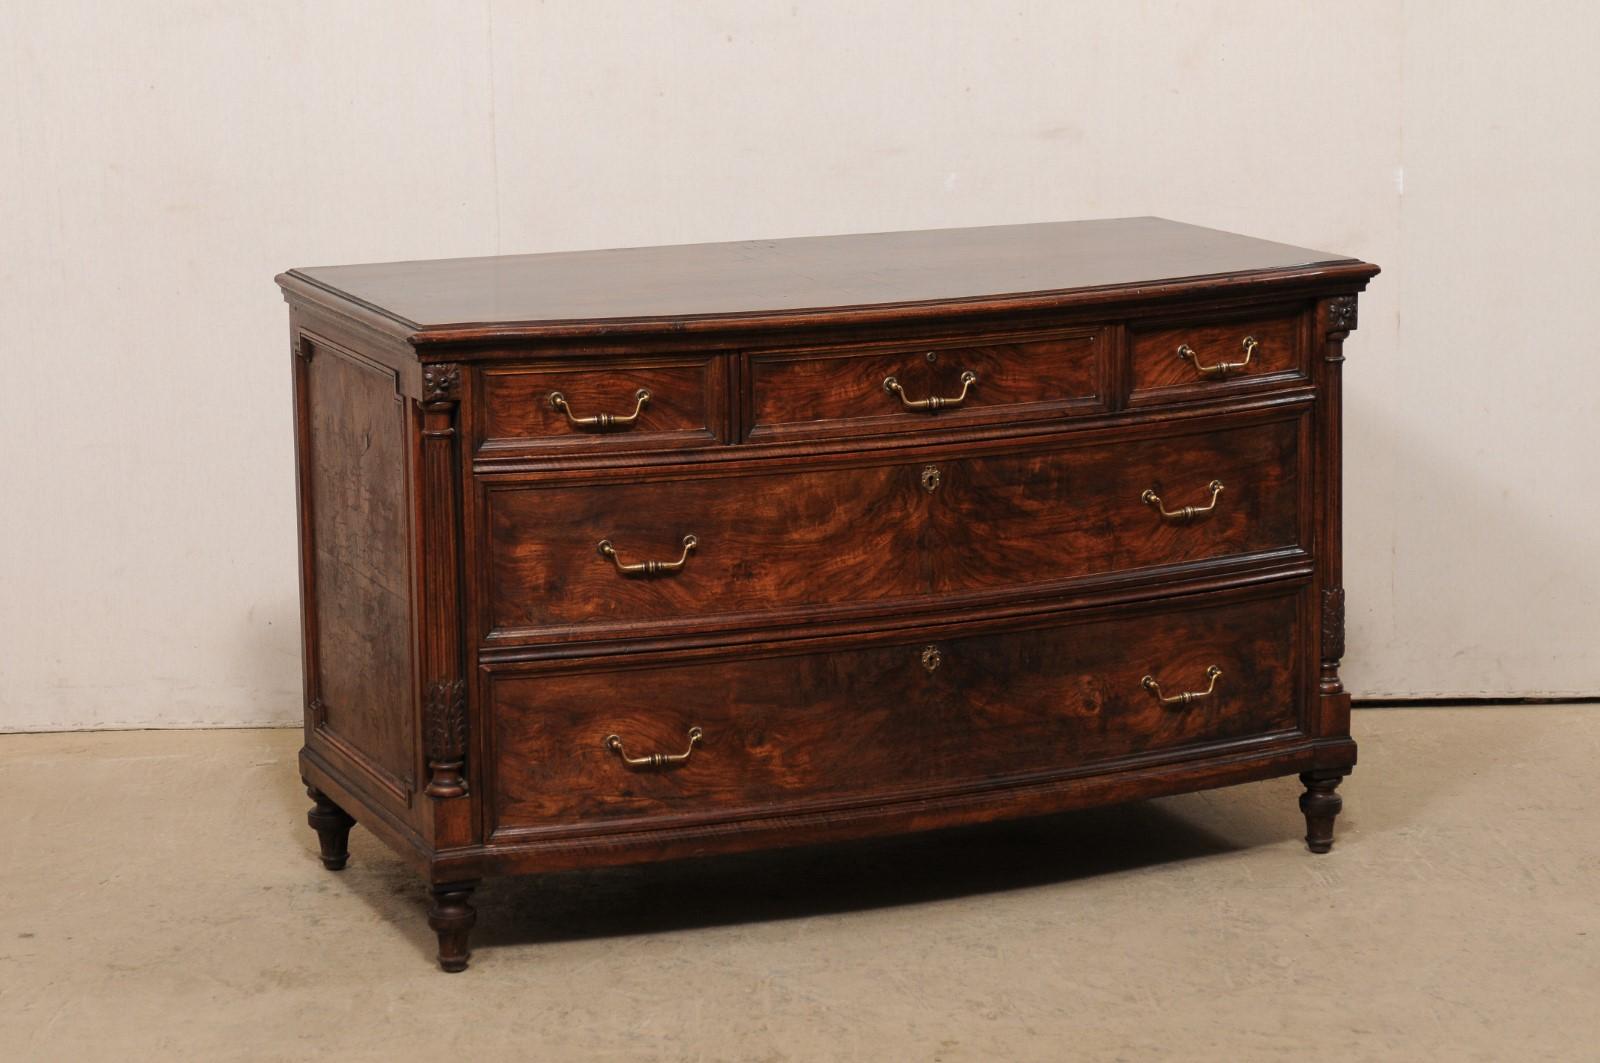 An American bow-front carved wood chest of five drawers from the early 20th century. This antique crotch mahogany wood veneered chest has a beautiful and subtly bowed front, flanked within a pair of round fluted side posts adorn with acanthus leaf